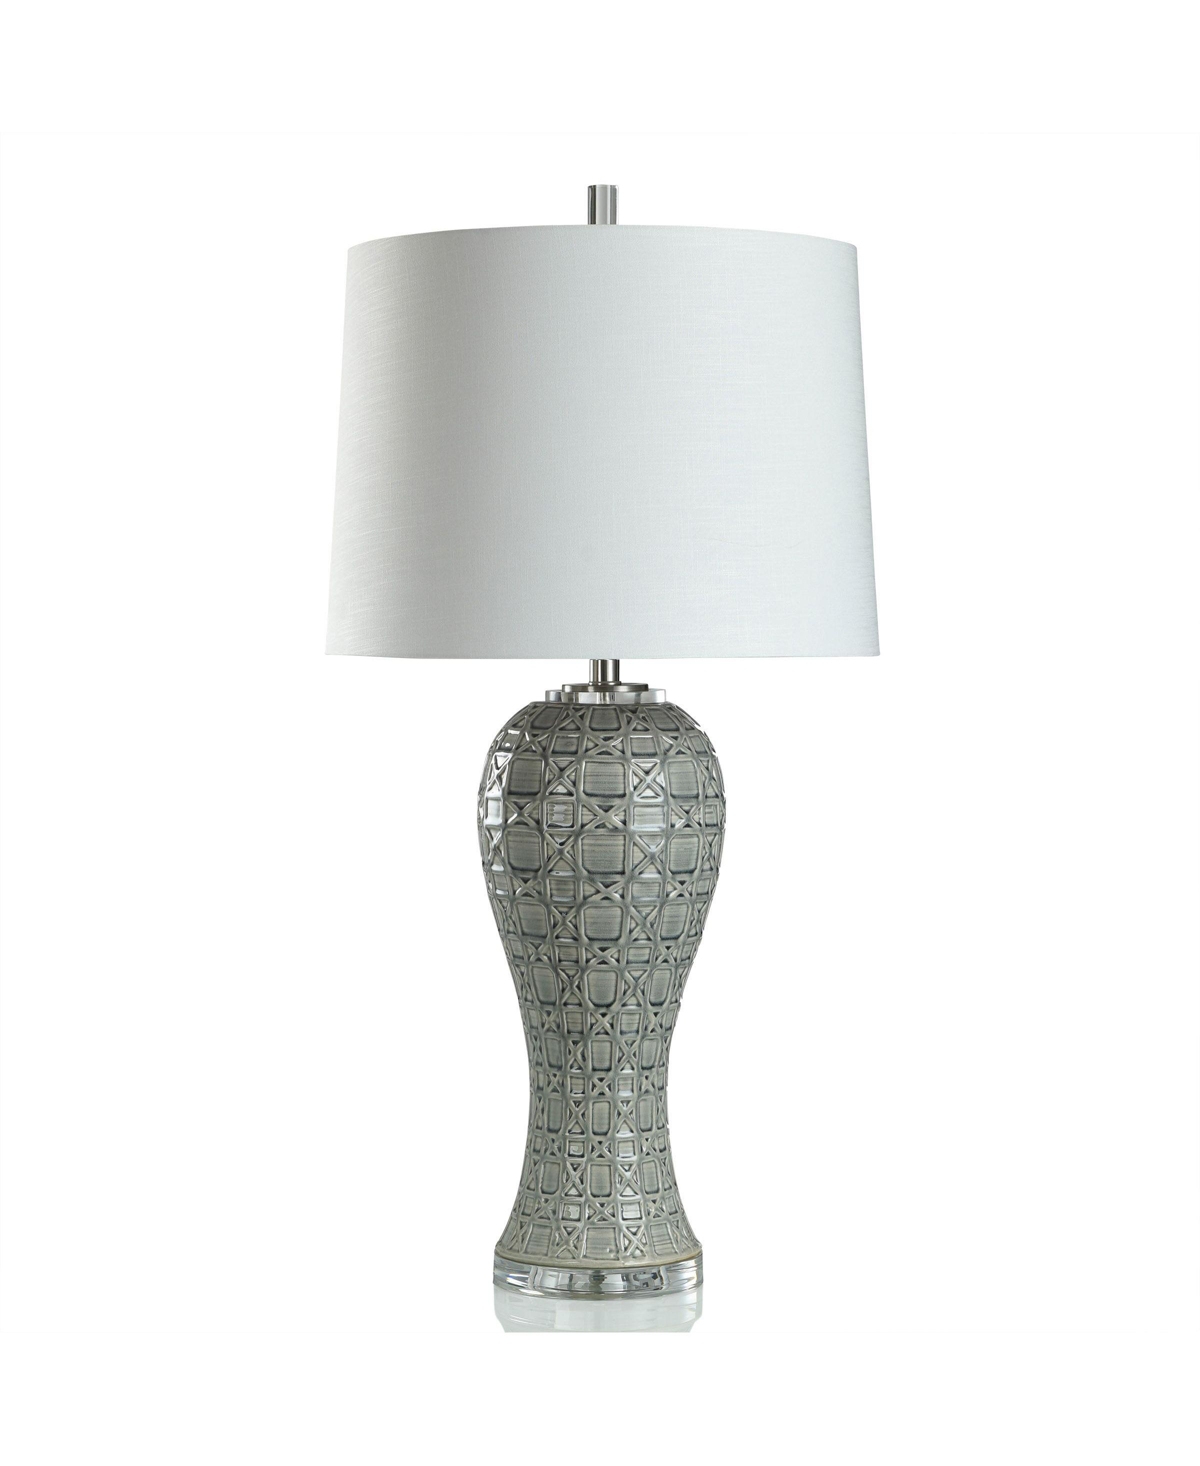 Stylecraft Home Collection 35.5" Whisper Geometric Overlay Design Glaze Table Lamp In Grey Glazed,geometric Shapes